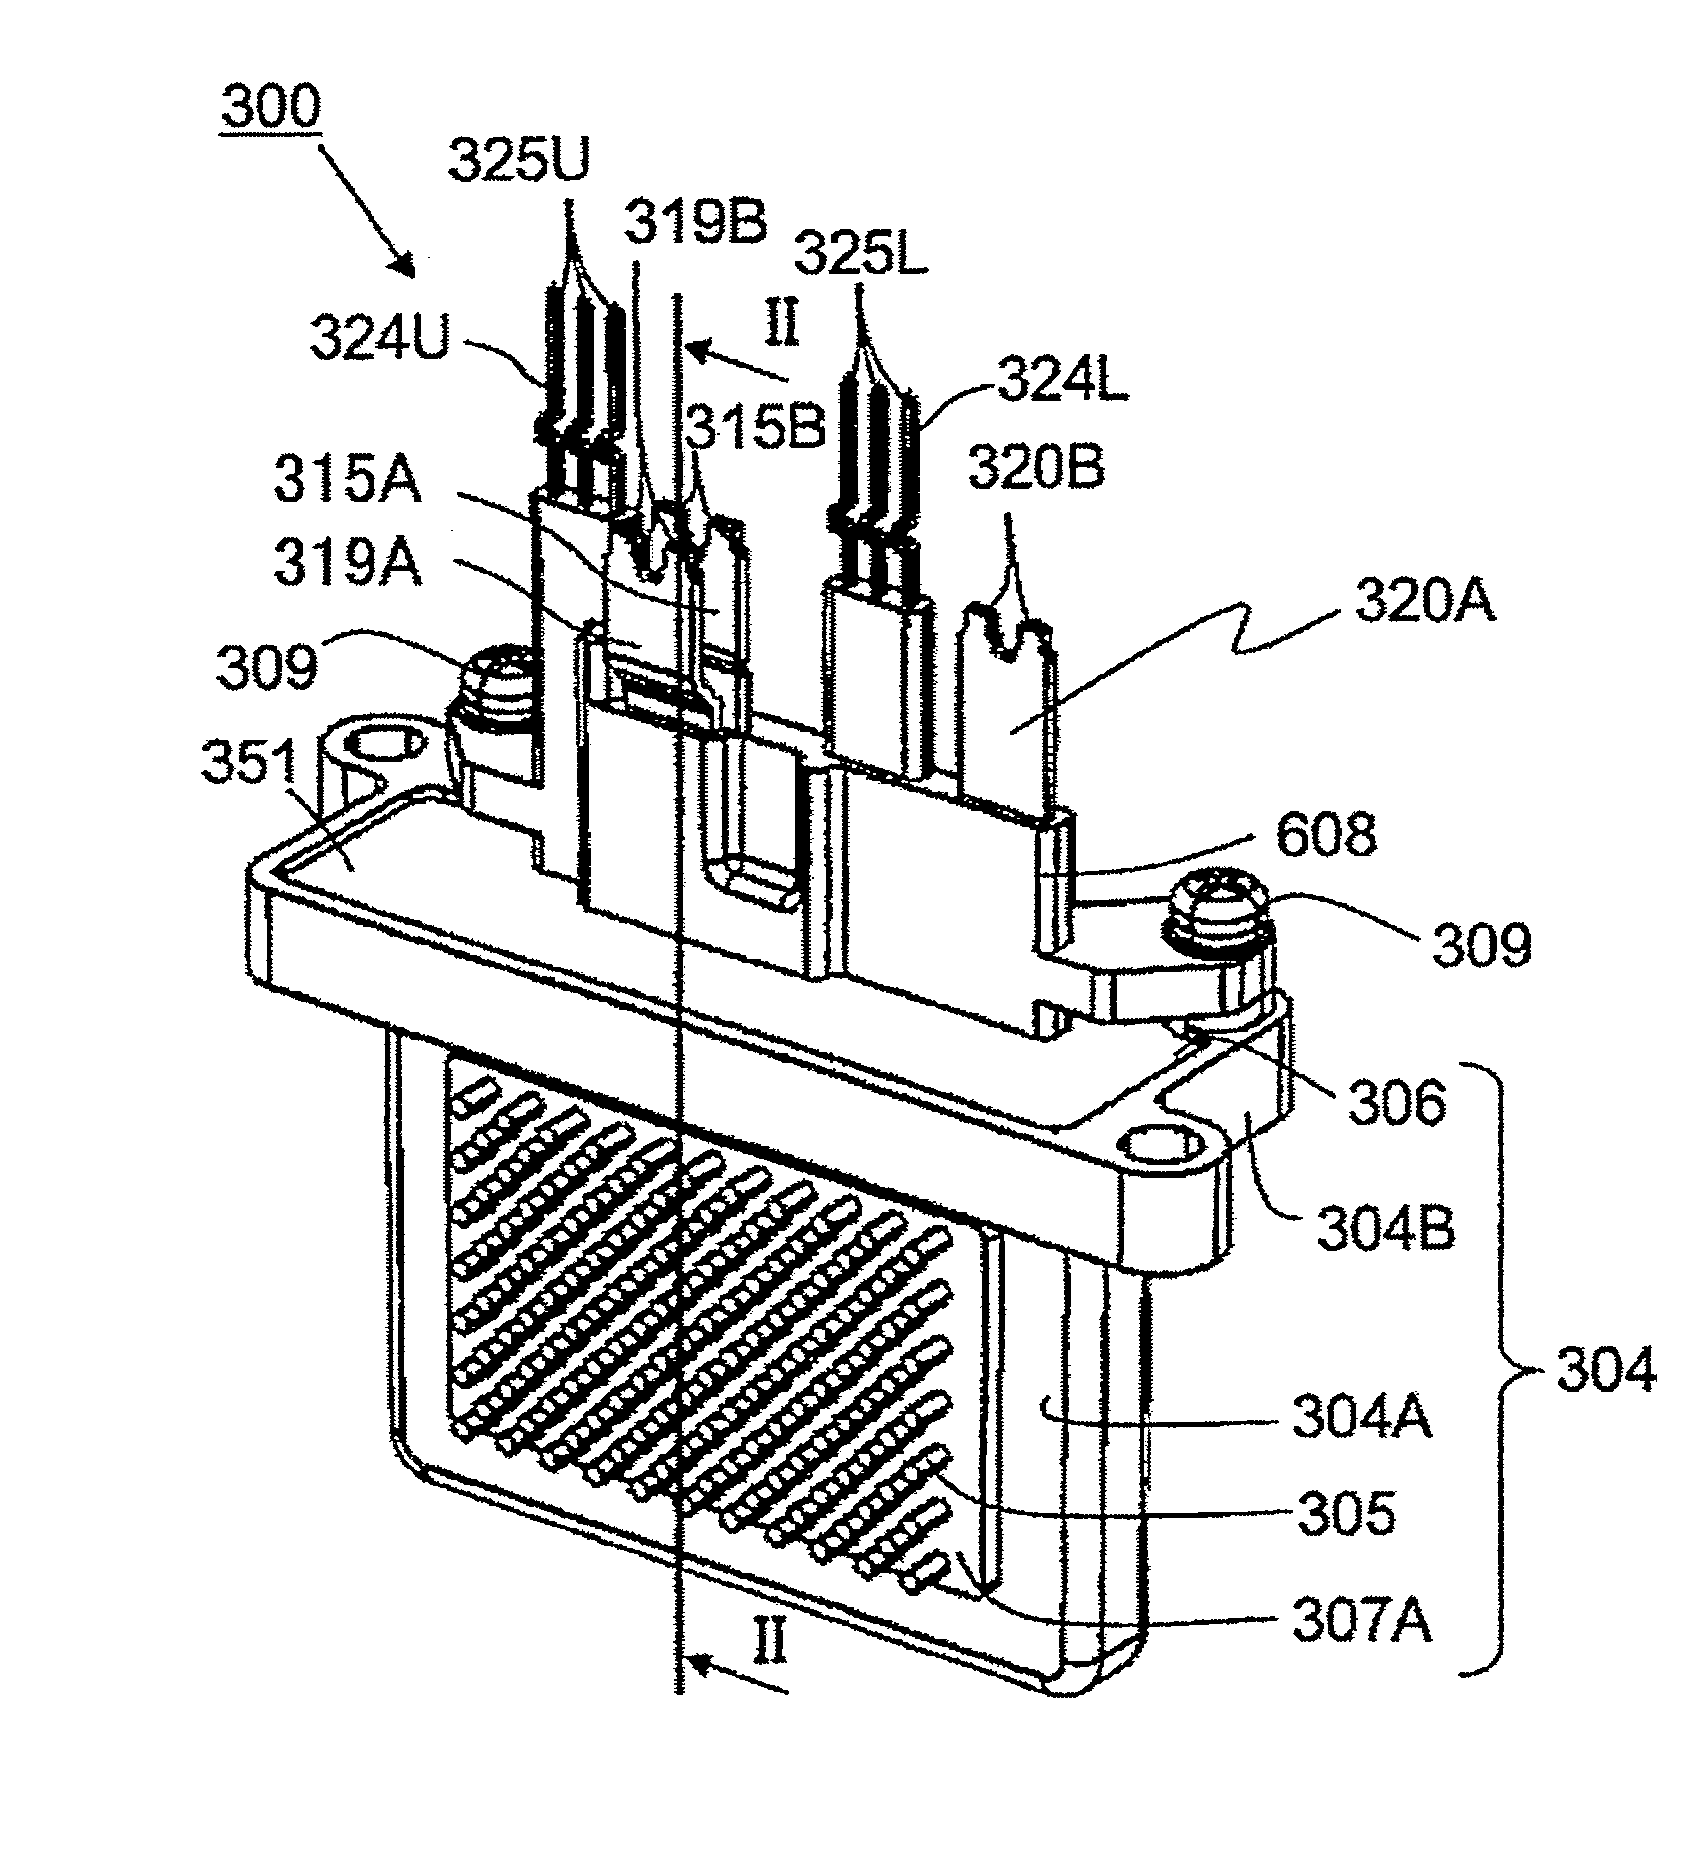 Power Semiconductor Module and Power Module